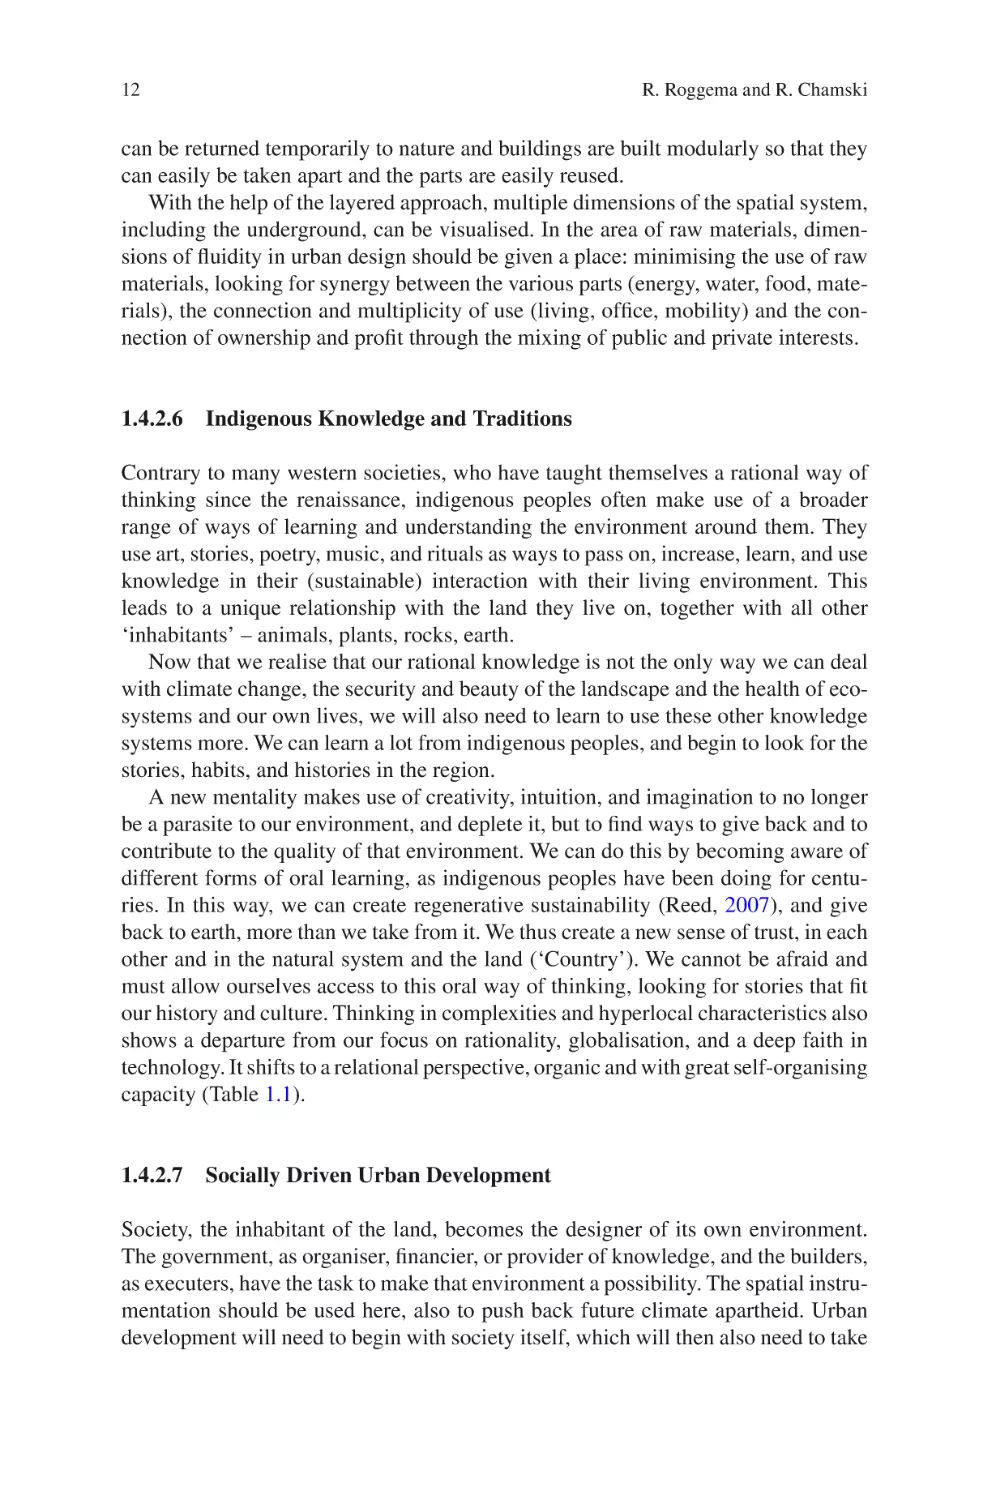 1.4.2.6 Indigenous Knowledge and Traditions
1.4.2.7 Socially Driven Urban Development